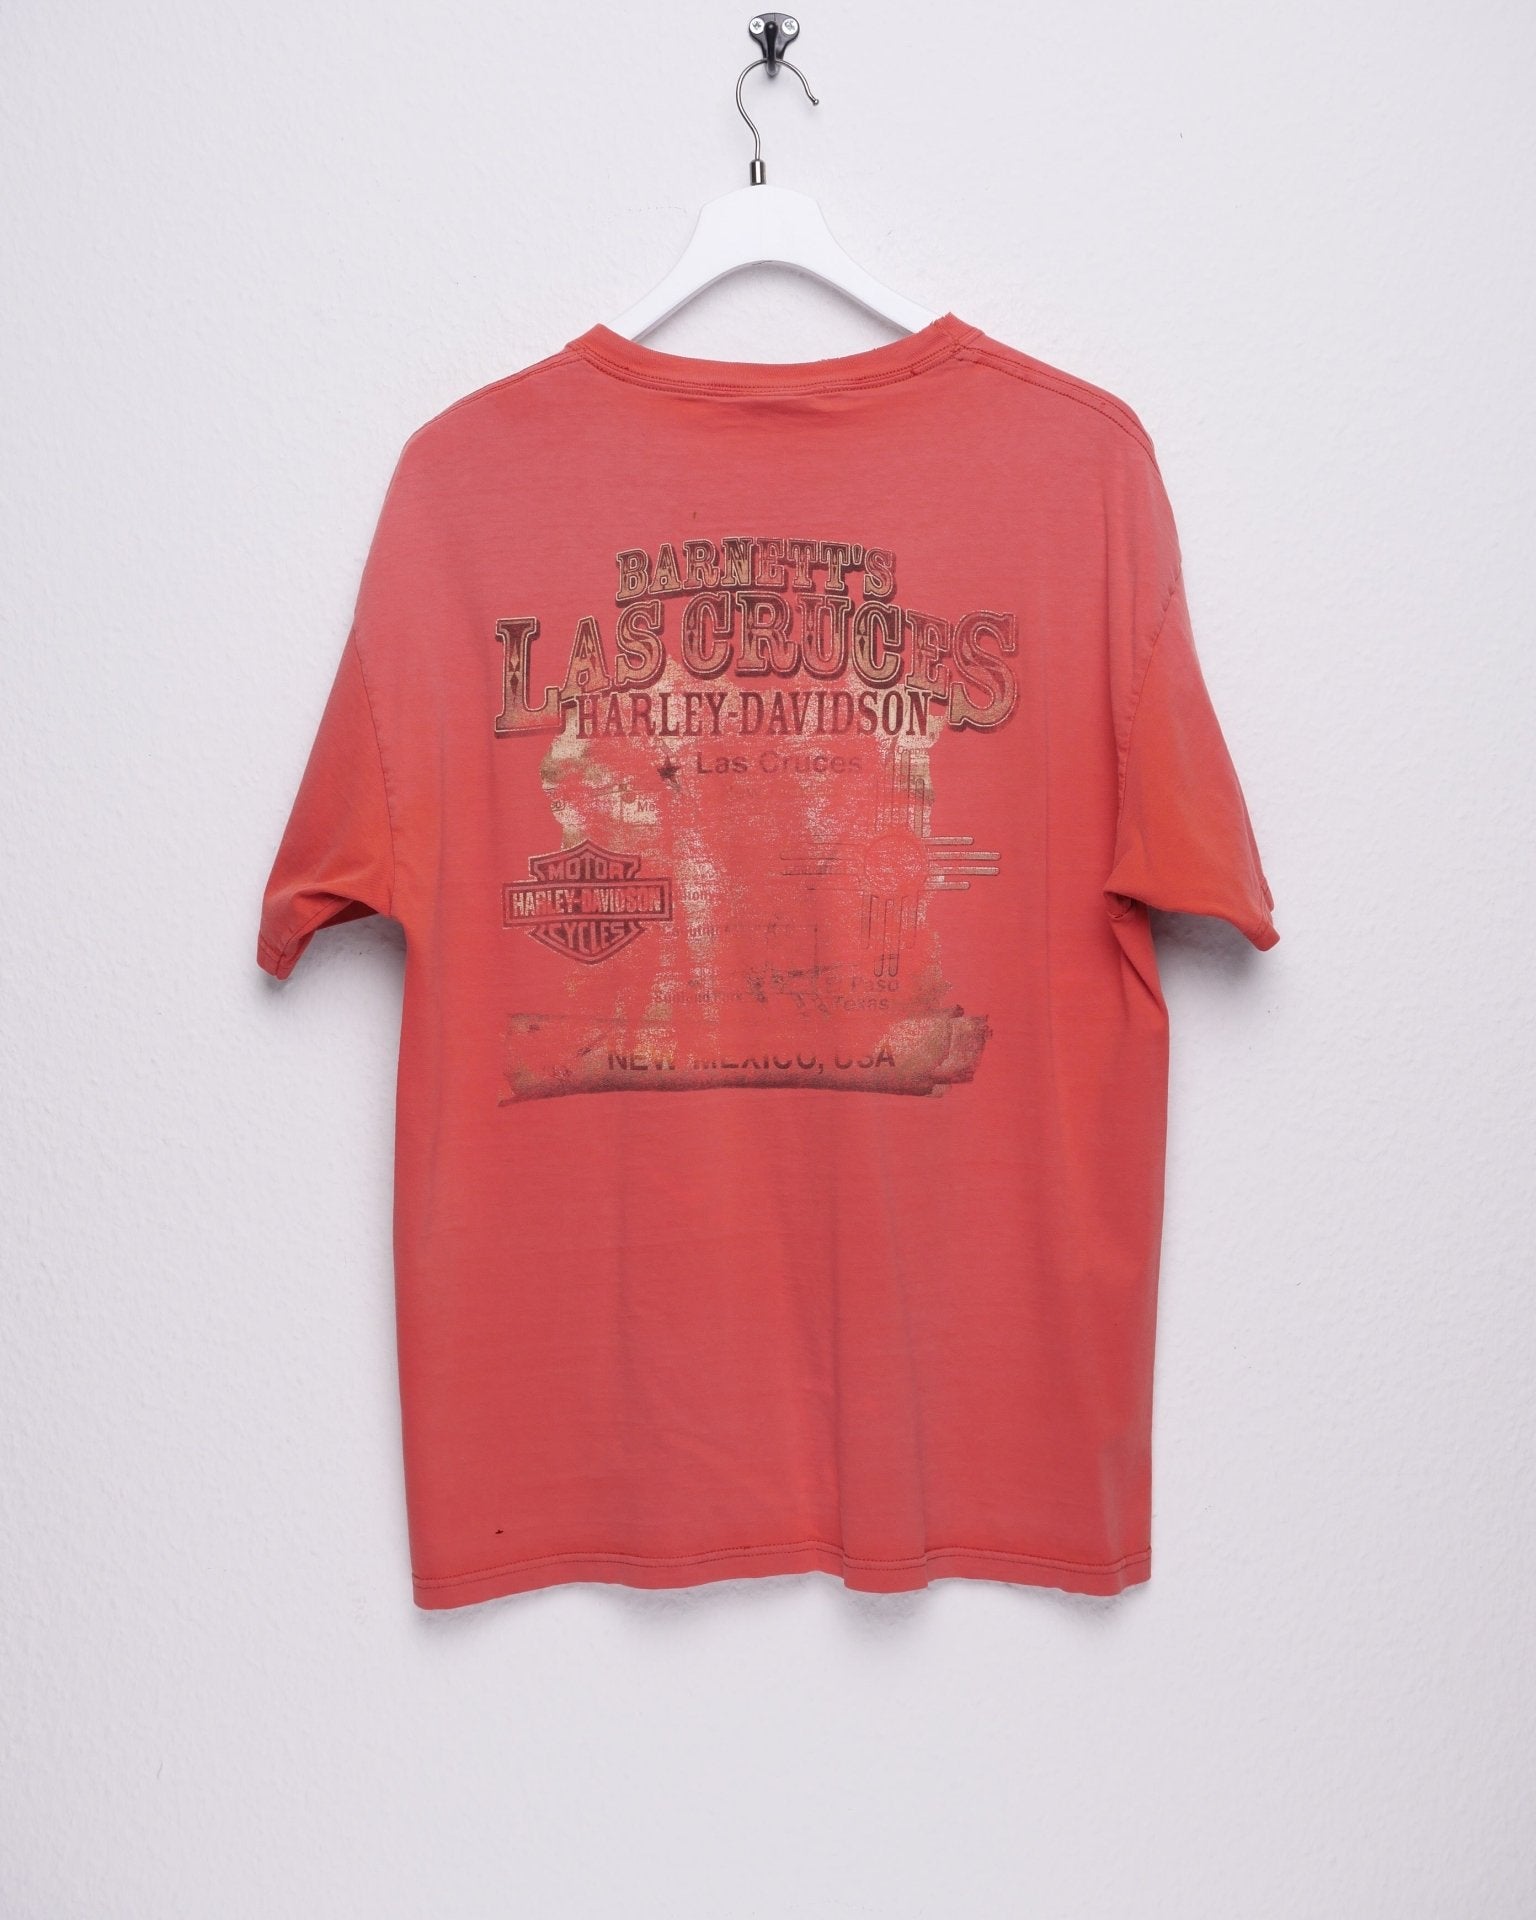 Harley Davidson New Mexico washed Graphic Shirt - Peeces